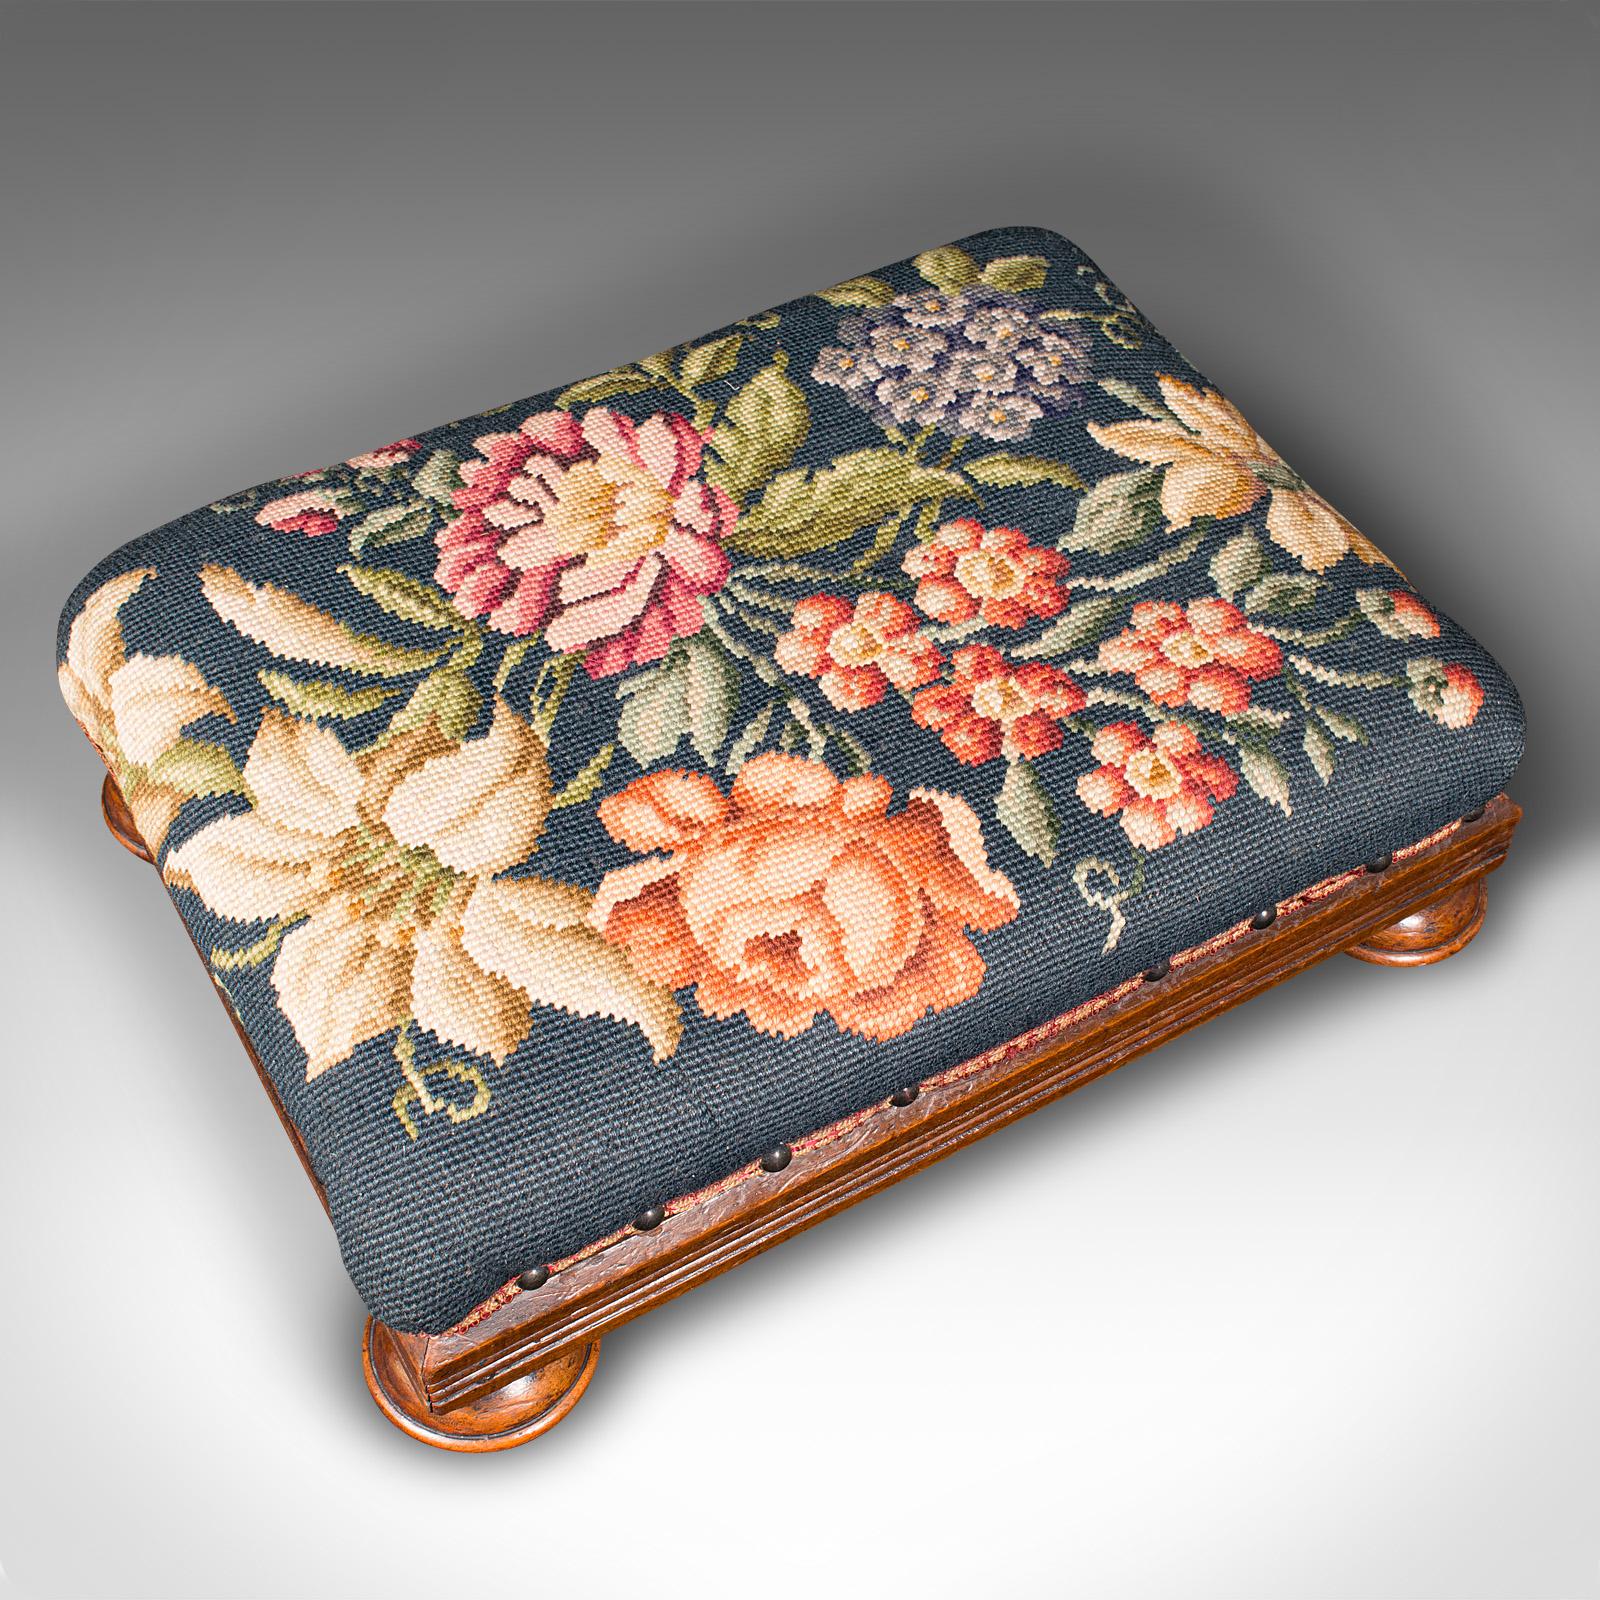 Tapestry Antique Footstool, English, Needlepoint, Fireside Footrest, Stool, Victorian For Sale